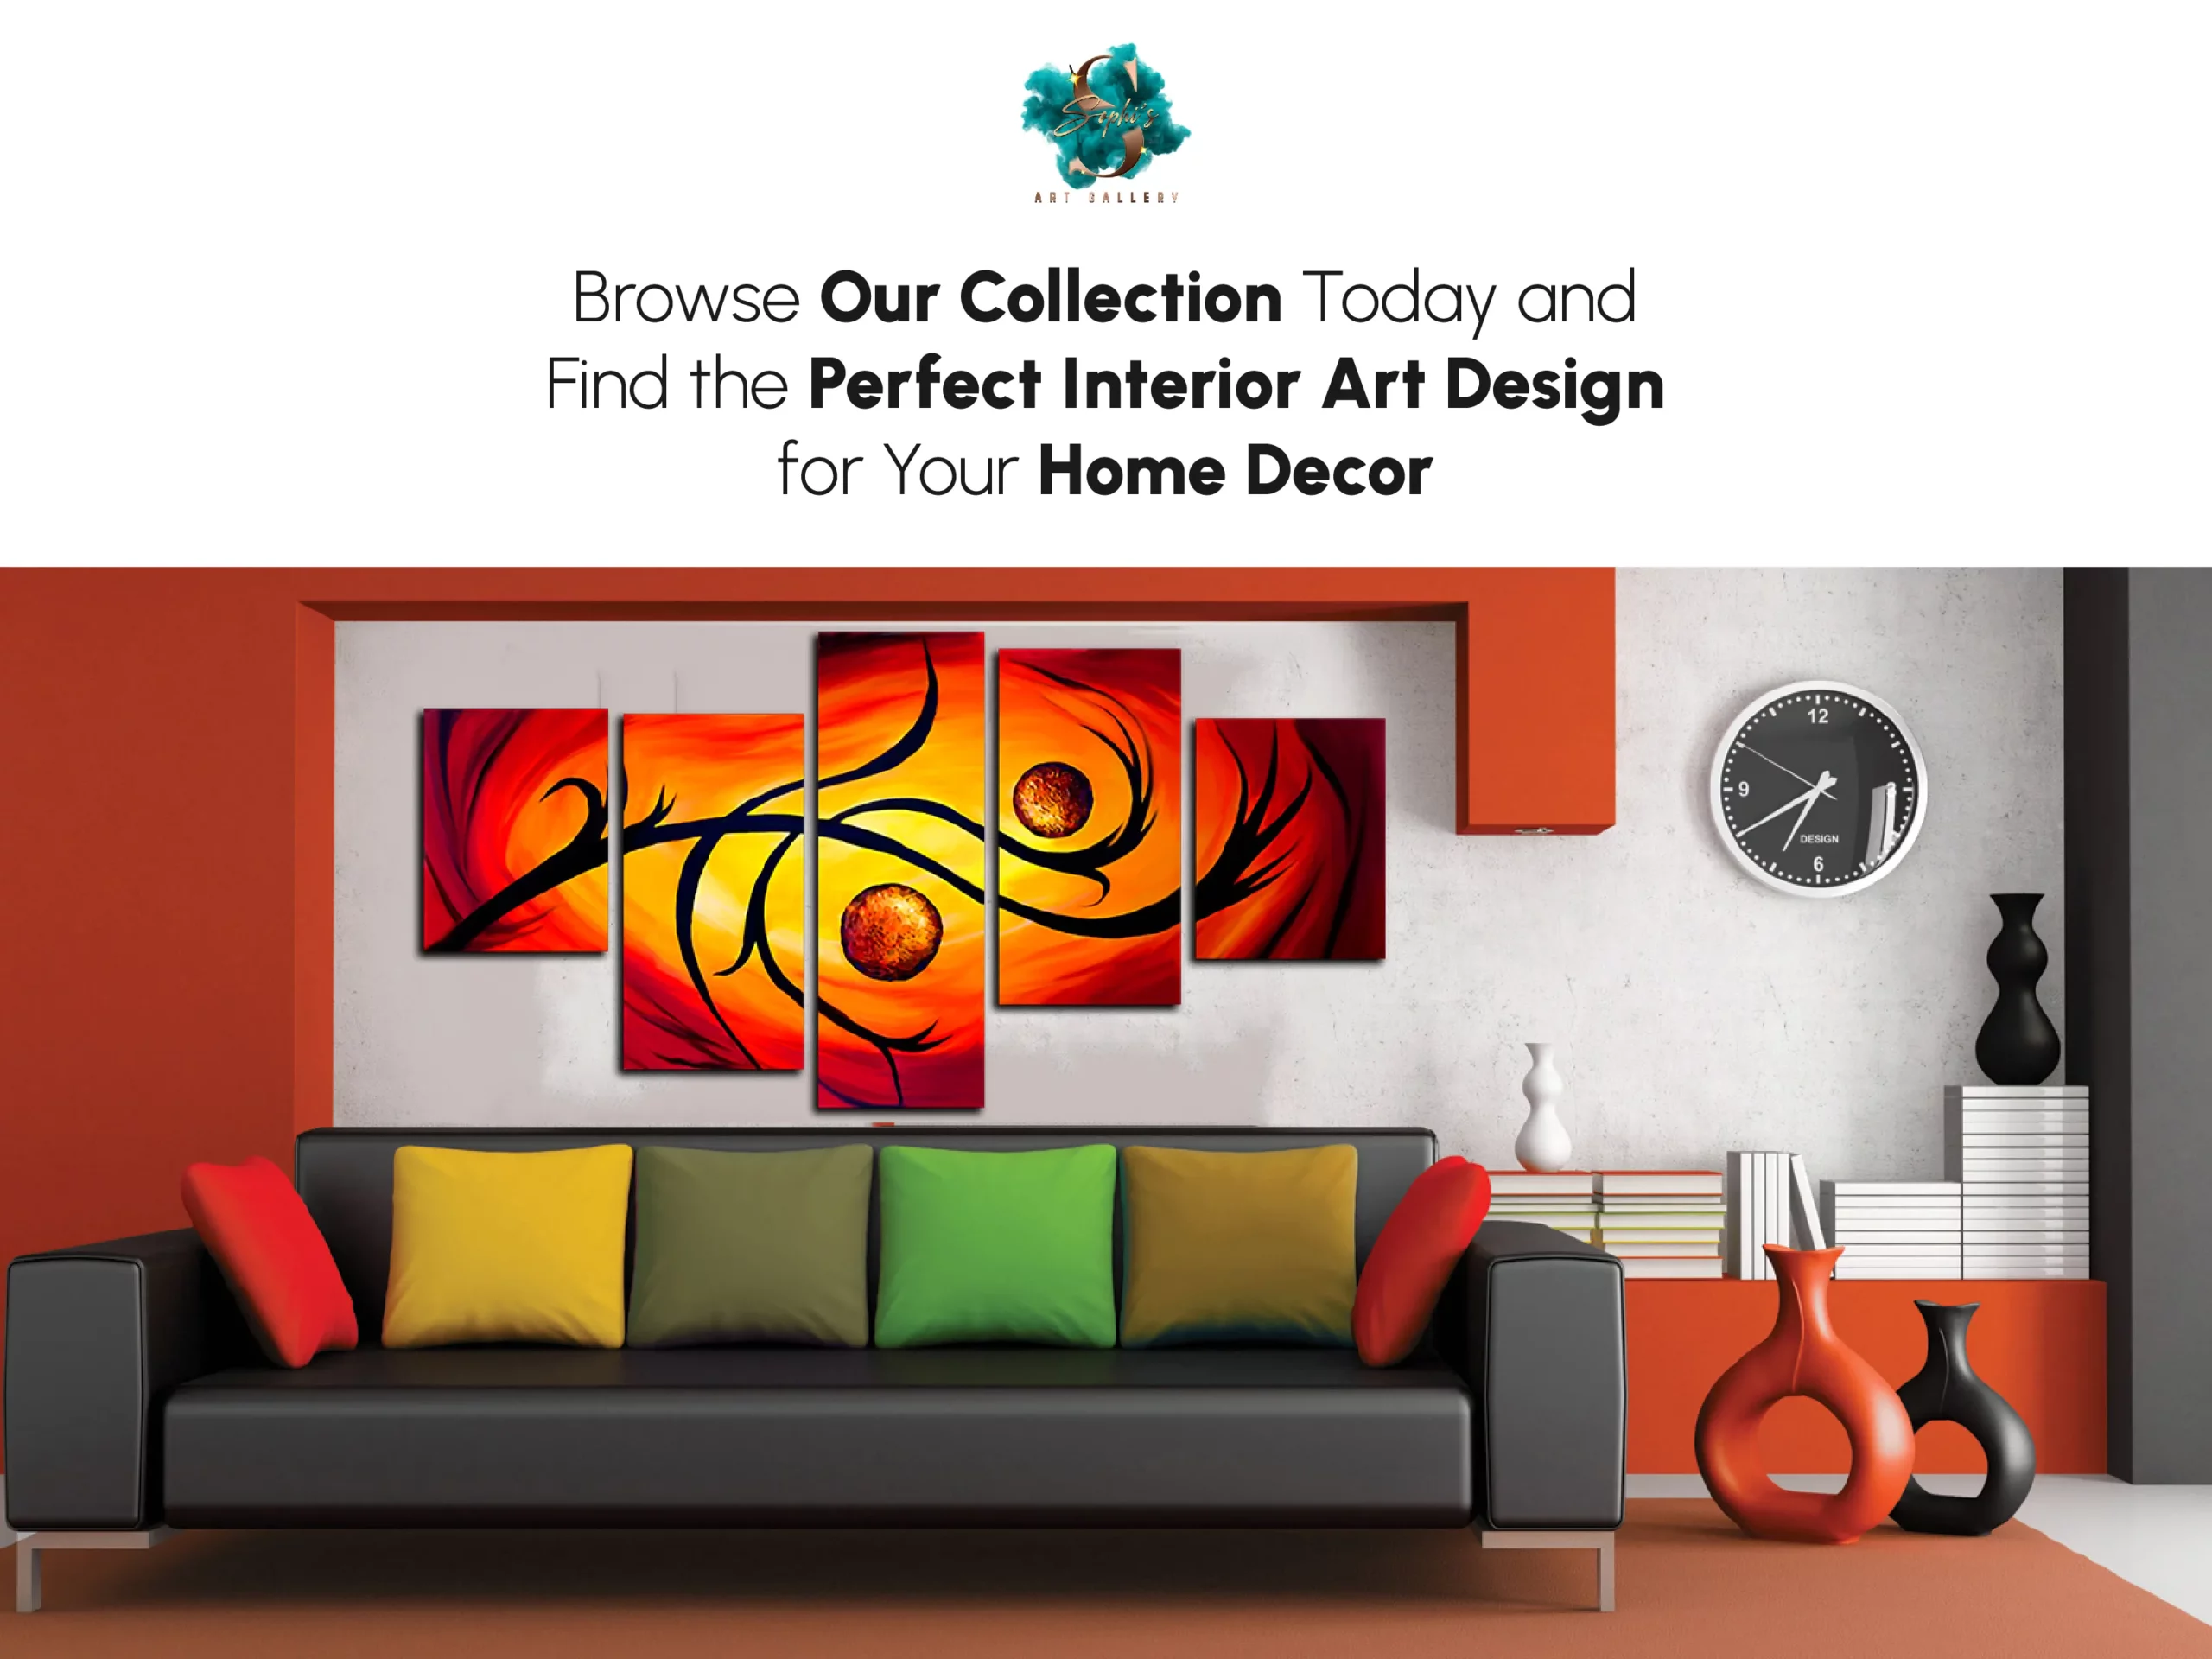 Browse Our Collection Today and Find the Perfect Interior Art Design for Your Home Decor